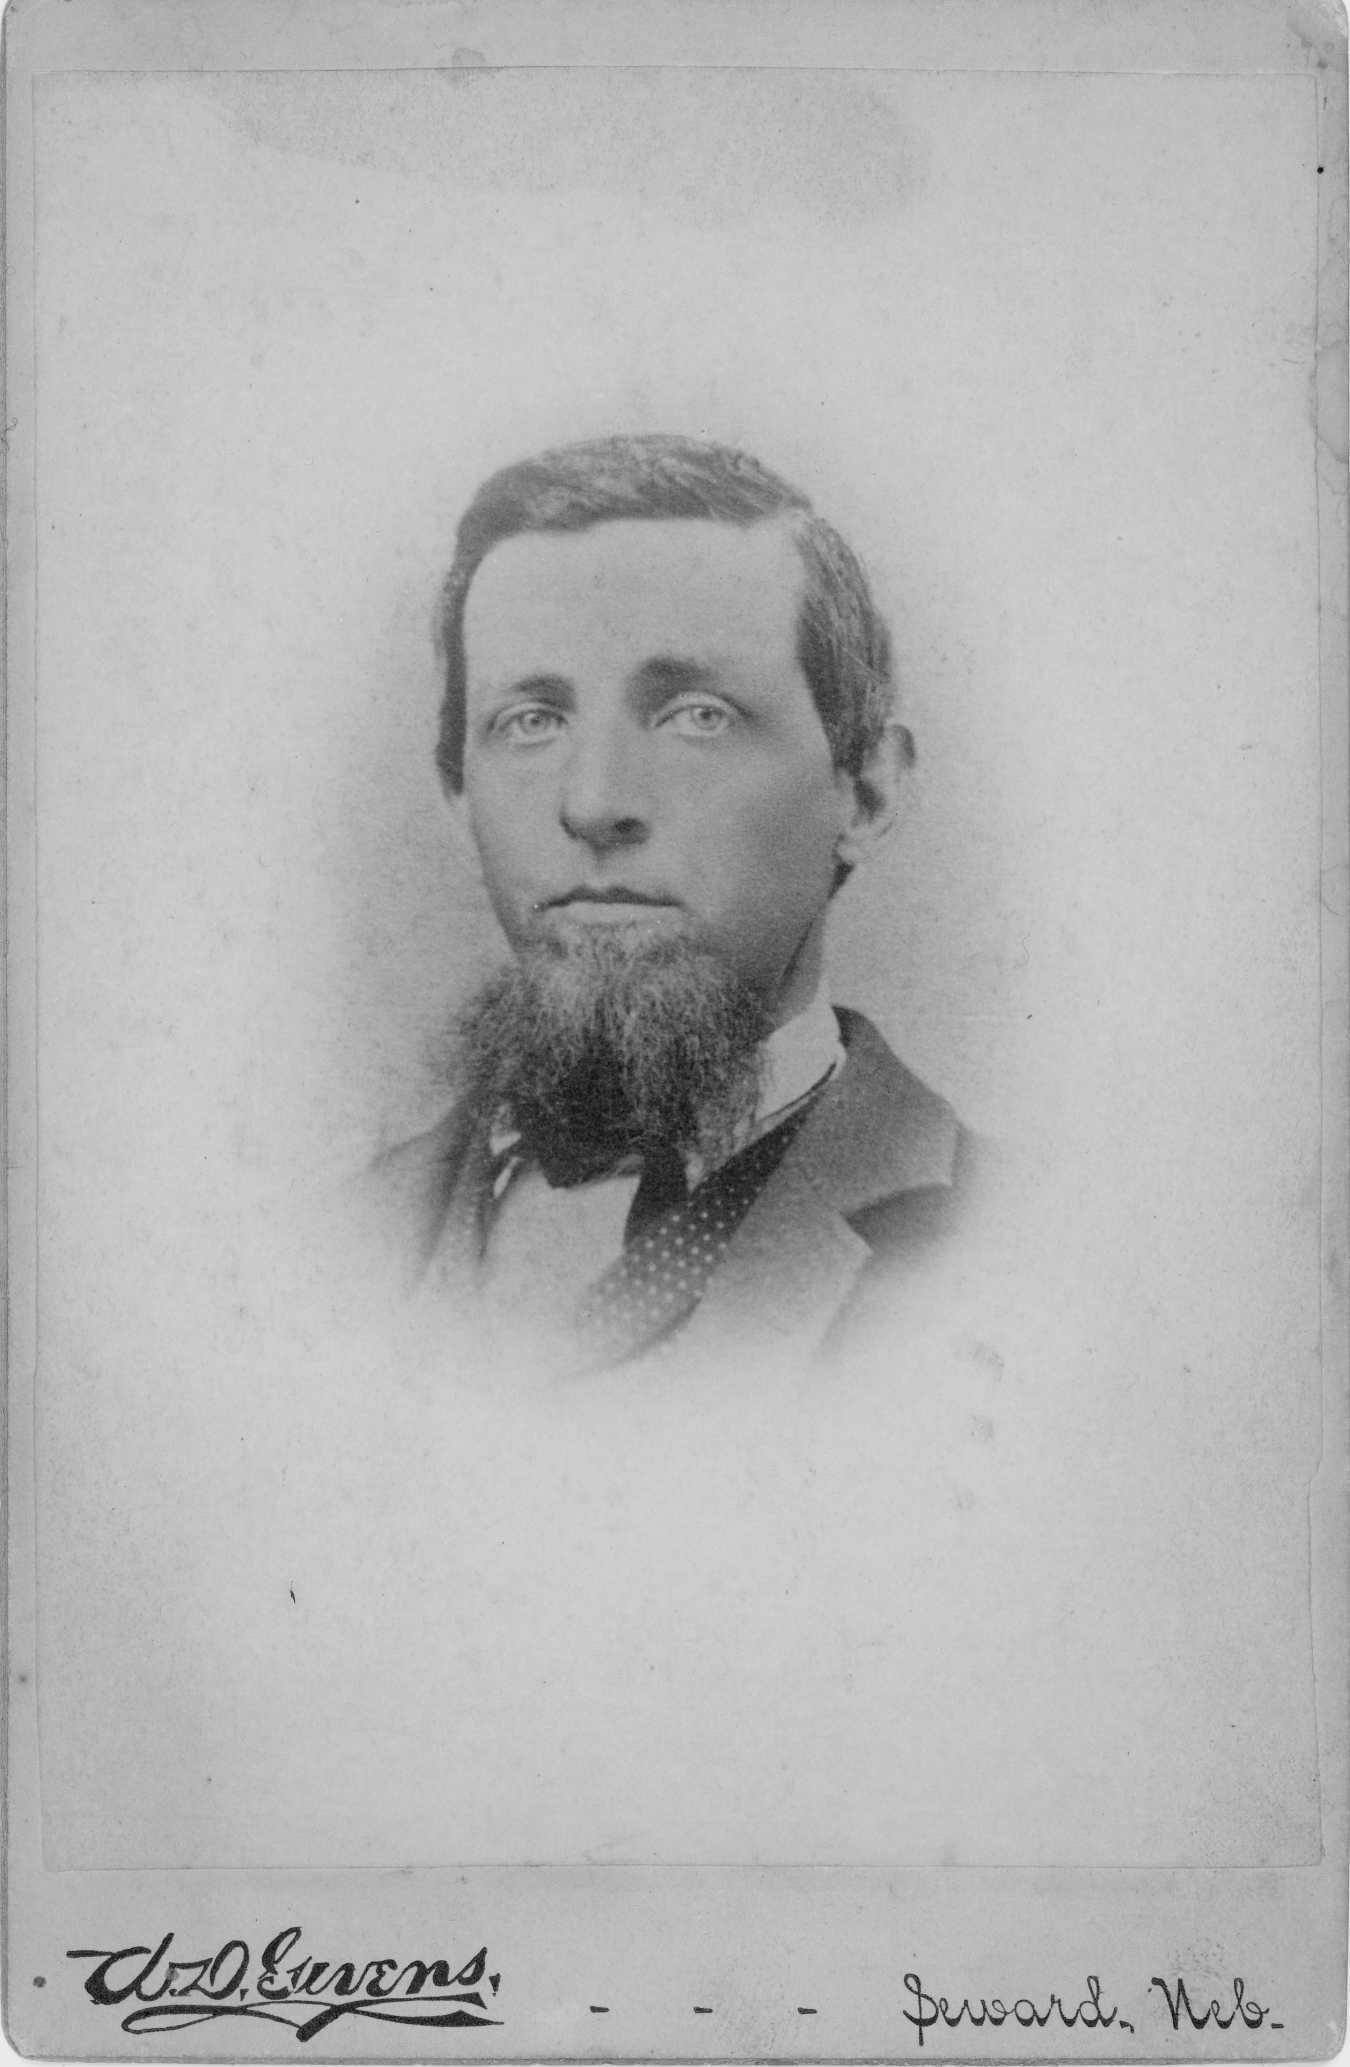  James Franklin Francis (Aug. 7, 1830, Loudoun County, Va.-June 28, 1883, Seward, Neb.) was Bob’s great-grandfather, the father of Charles Howe Francis, and the grandfather of James William Francis. Wife: Elizabeth Howard Ackrom Francis, 1831-1890. H